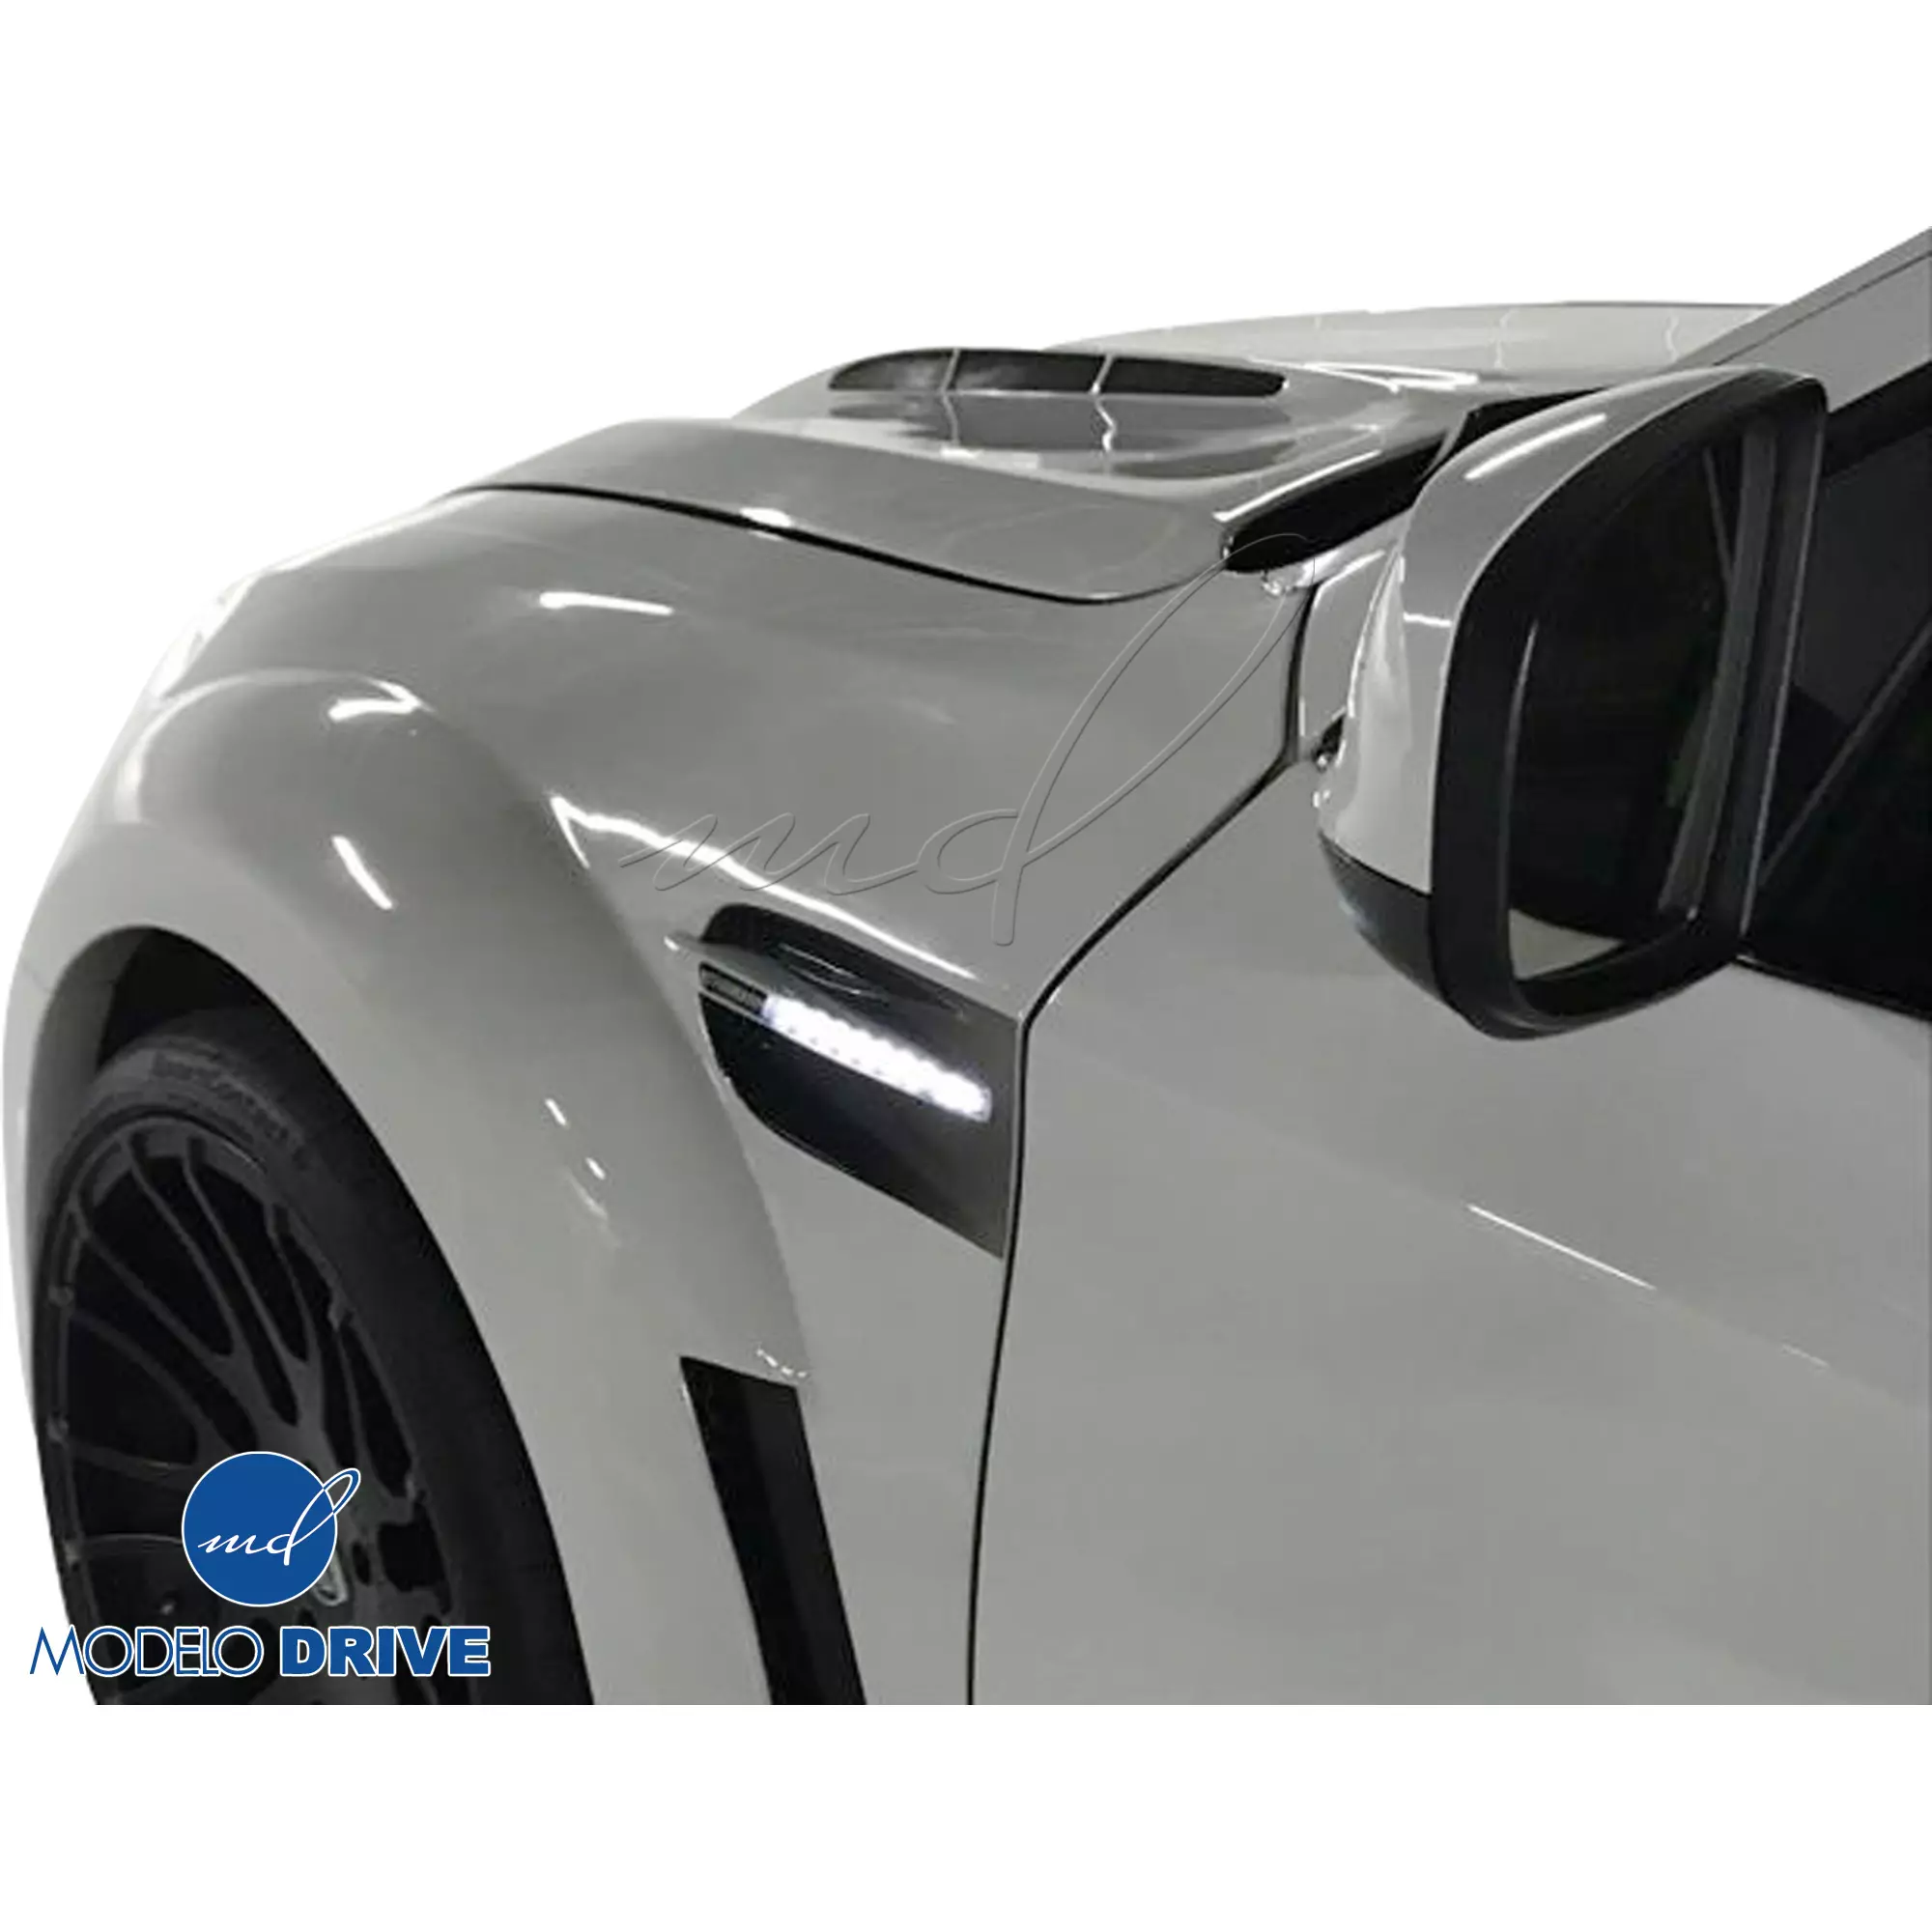 ModeloDrive FRP HAMA Wide Body Fenders (front) 2pc > BMW X6 E71 2008-2014 - Image 4